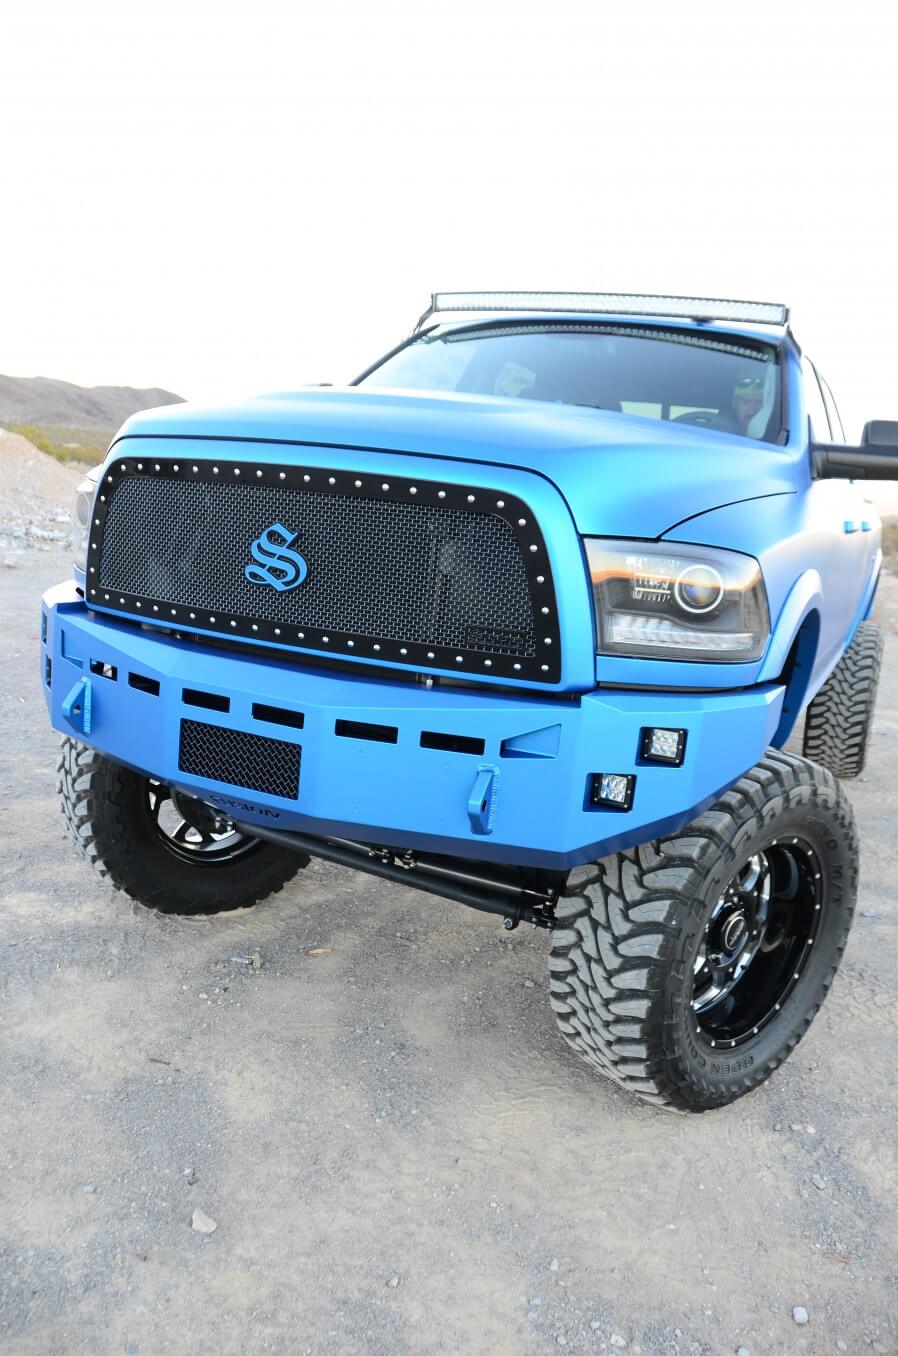 For a gnarly look up front, Matt installed a massive Fusion bumper with recessed LEDs, plus a mesh from Status Grilles with low-profile spikes and a color-matched center emblem.